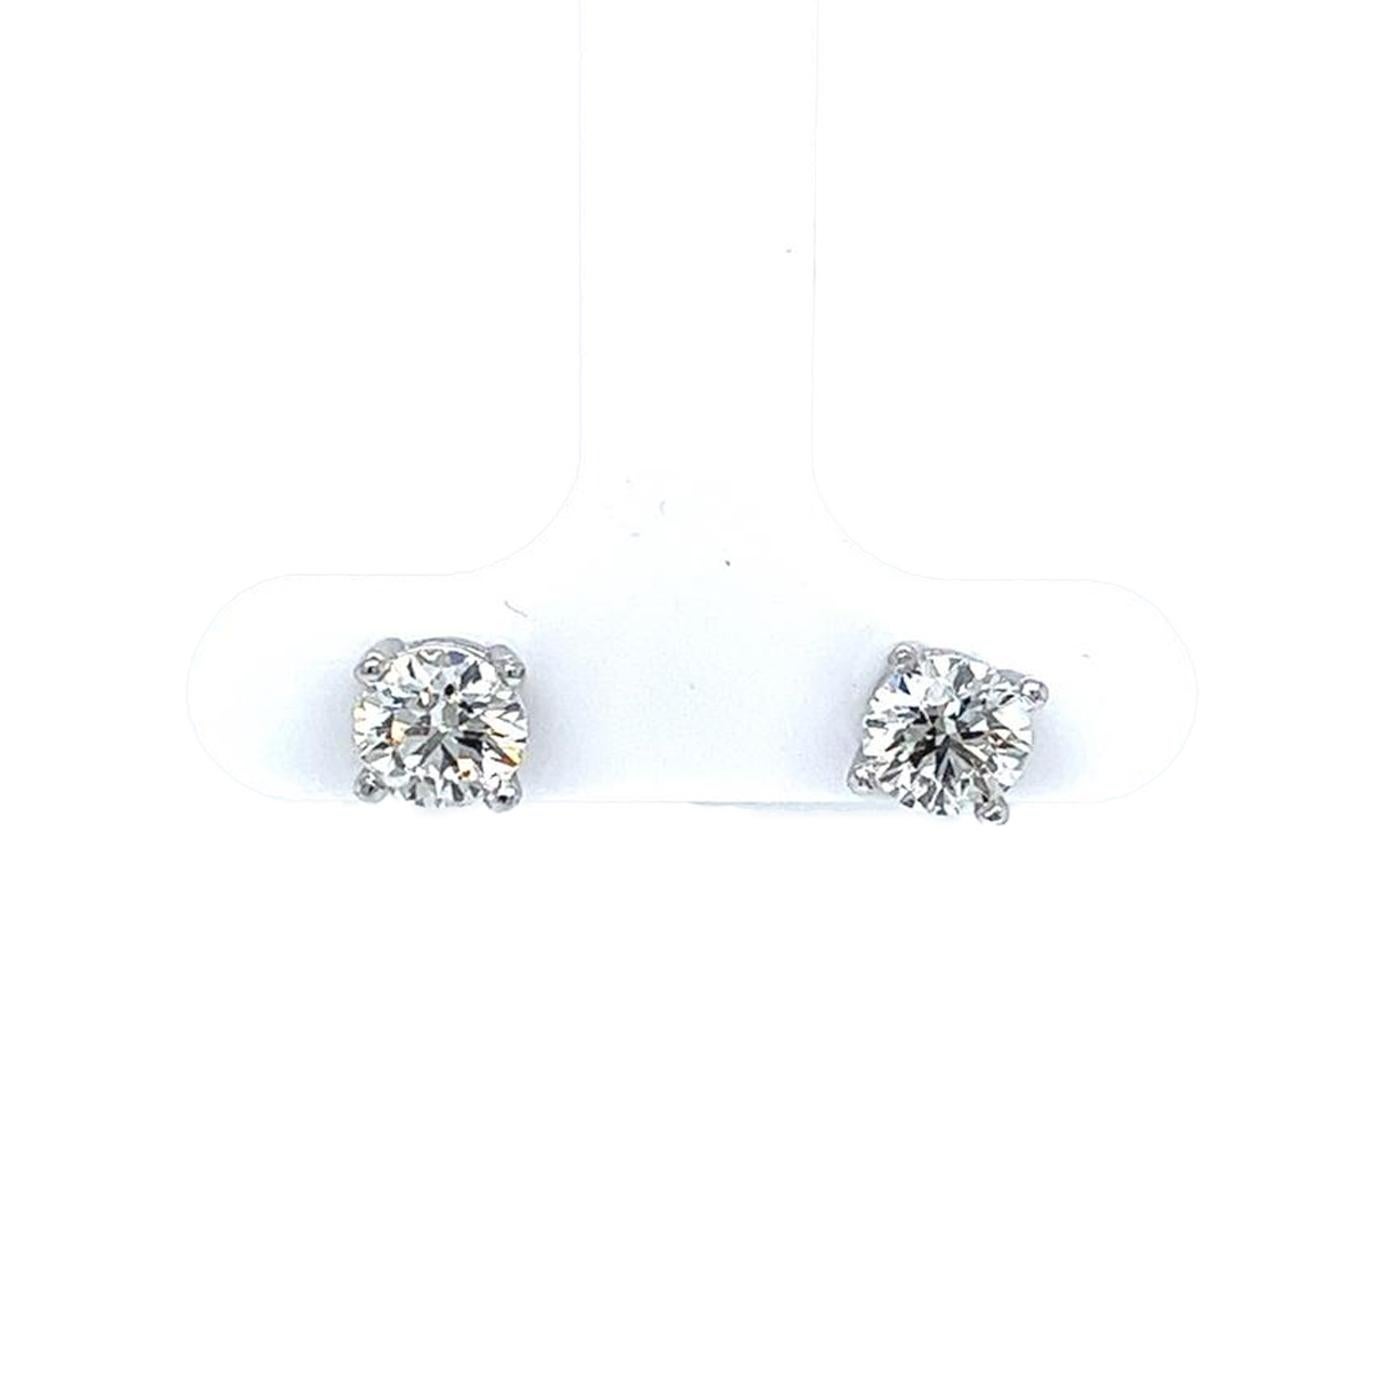 The 1.41ctw Diamond earrings in 4 Prong catch the light perfectly, making them dance with scintillating brilliance. The Diamond Earrings are feminine and delicate, offering a refined and elegant design, Day or night, adding sparkle and elegance to